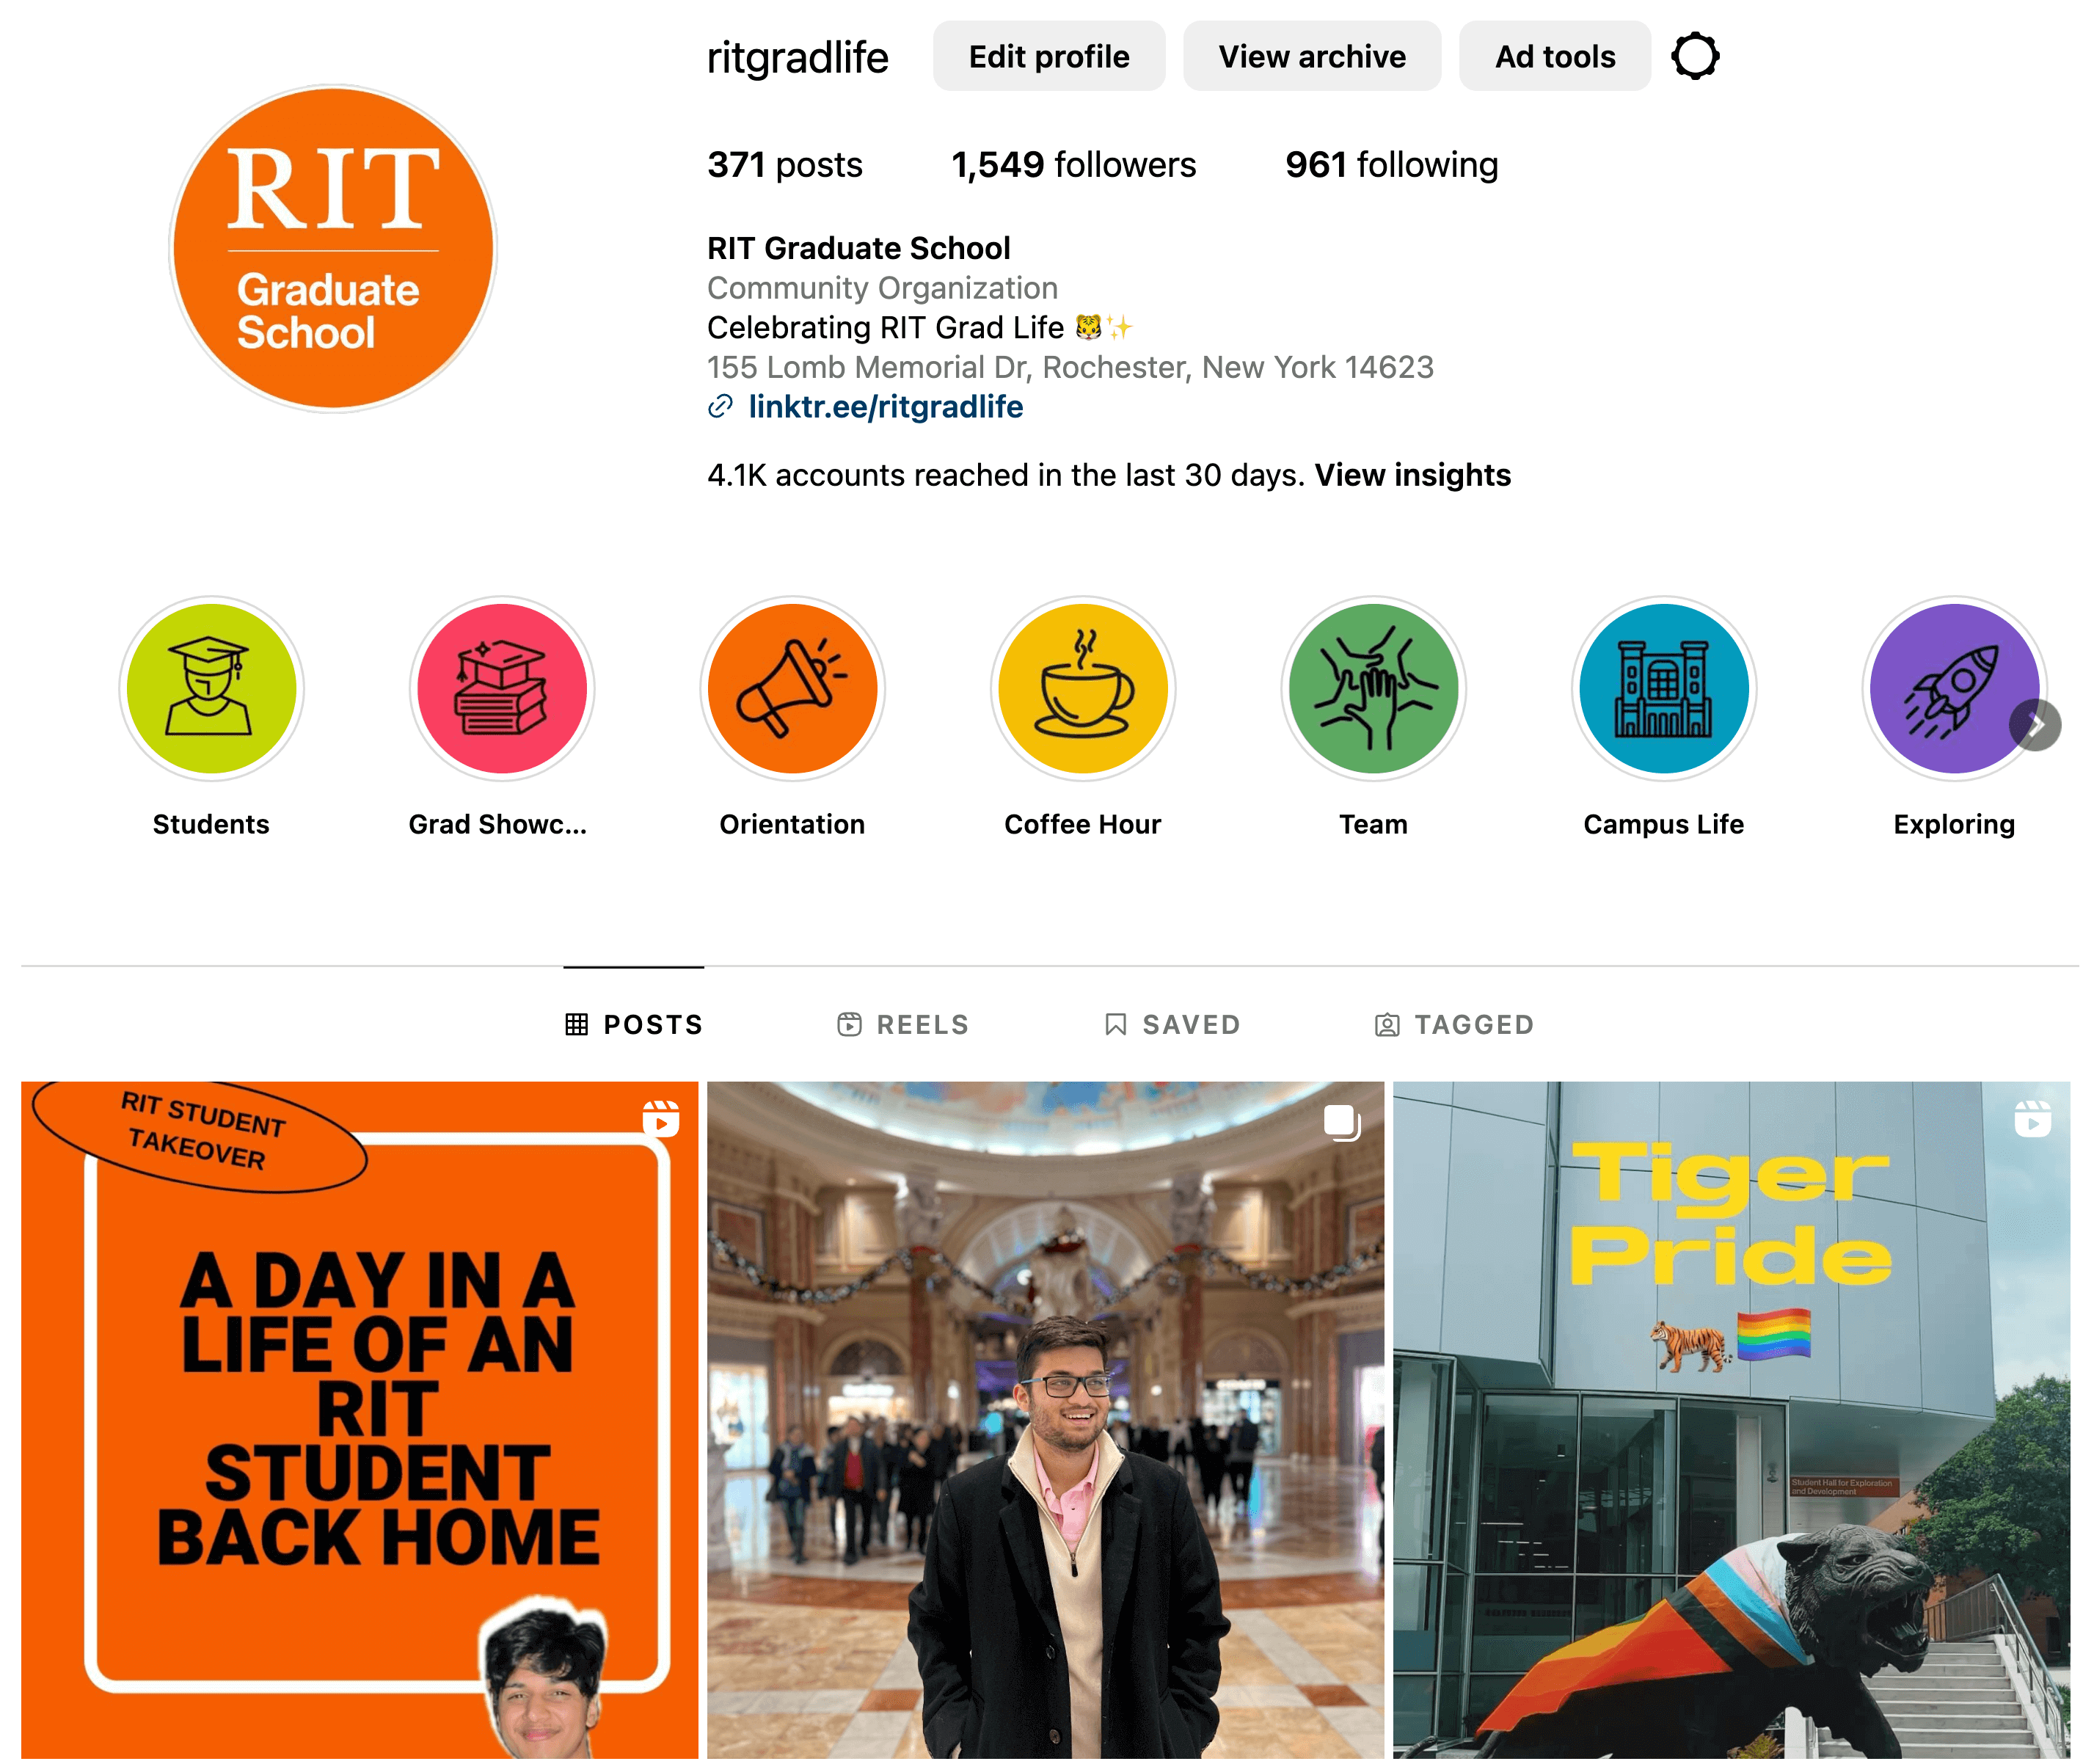 RIT Graduate School Instagram profile image with highlights icons, and 3 tiles with 2/3 grad students and1/3  the RIT tiger statue wearing the pride flag